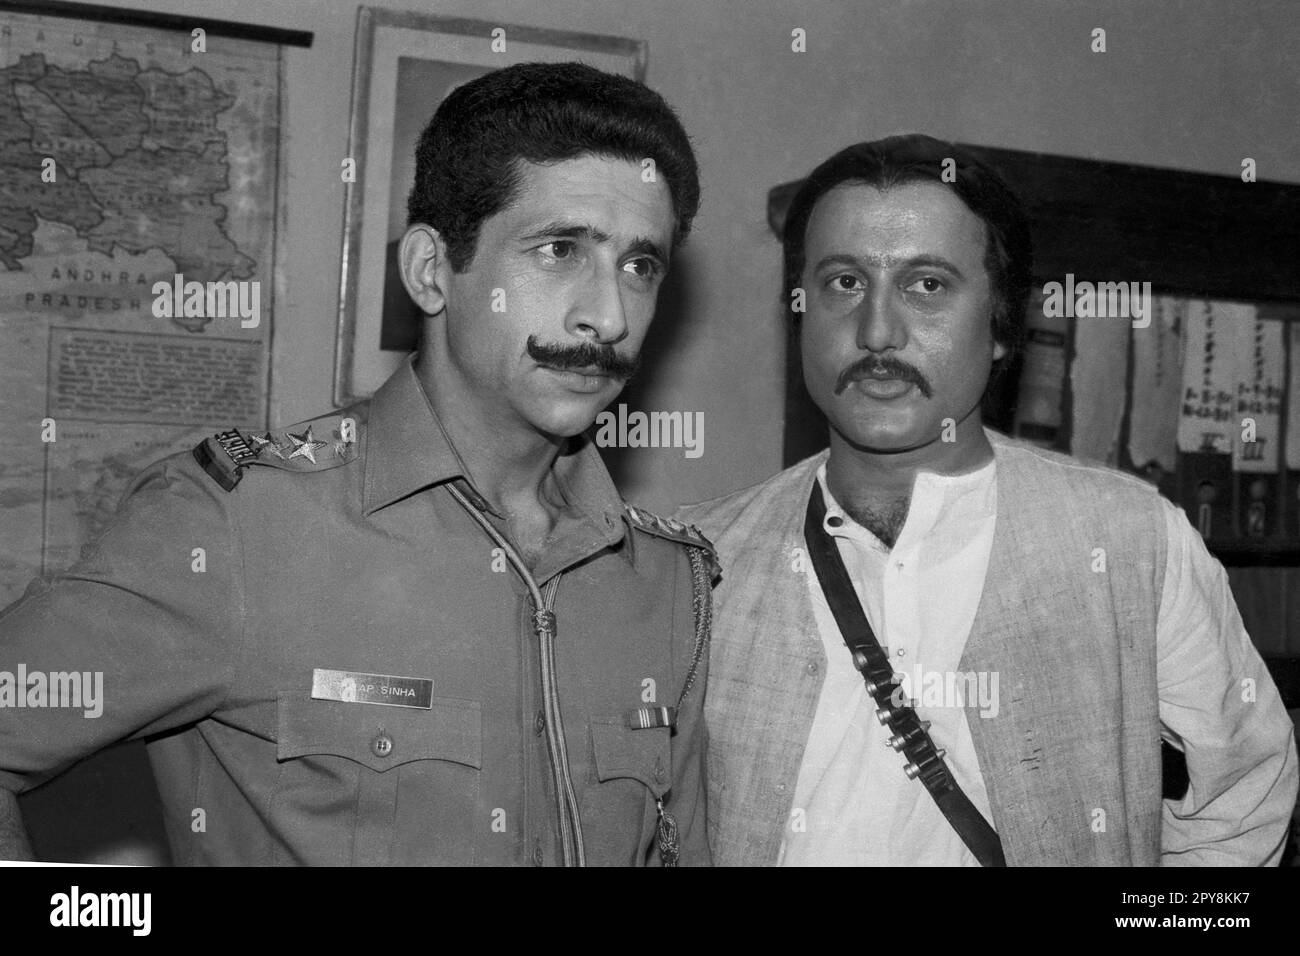 Indian old vintage 1980s black and white bollywood cinema hindi movie film actor, India, Naseeruddin Shah, Anupam Kher, Indian actor Stock Photo